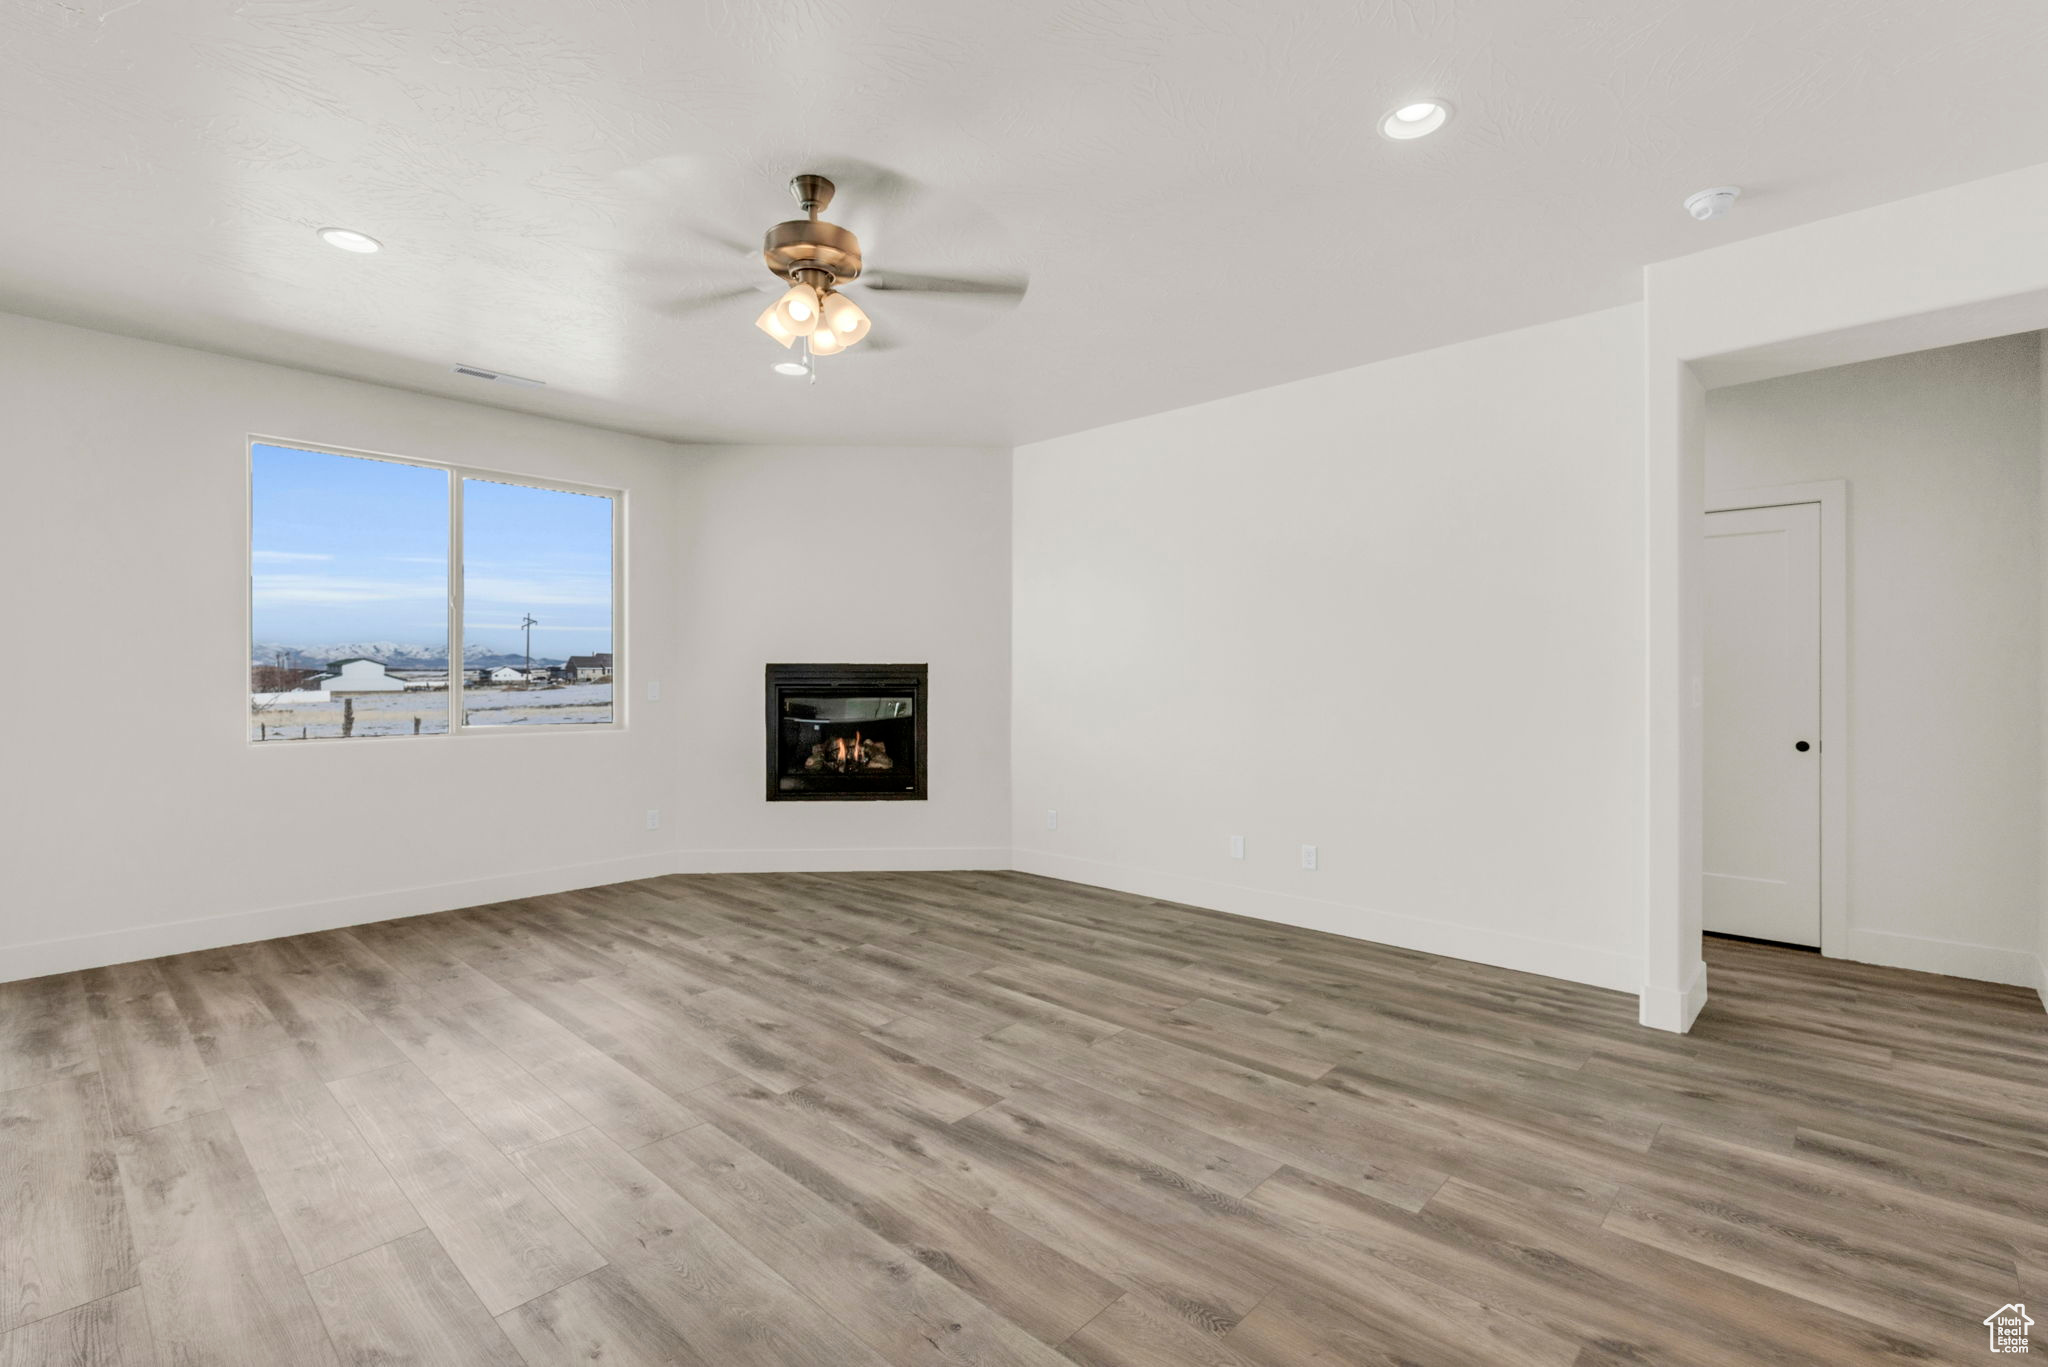 Unfurnished living room featuring light hardwood / wood-style floors and ceiling fan